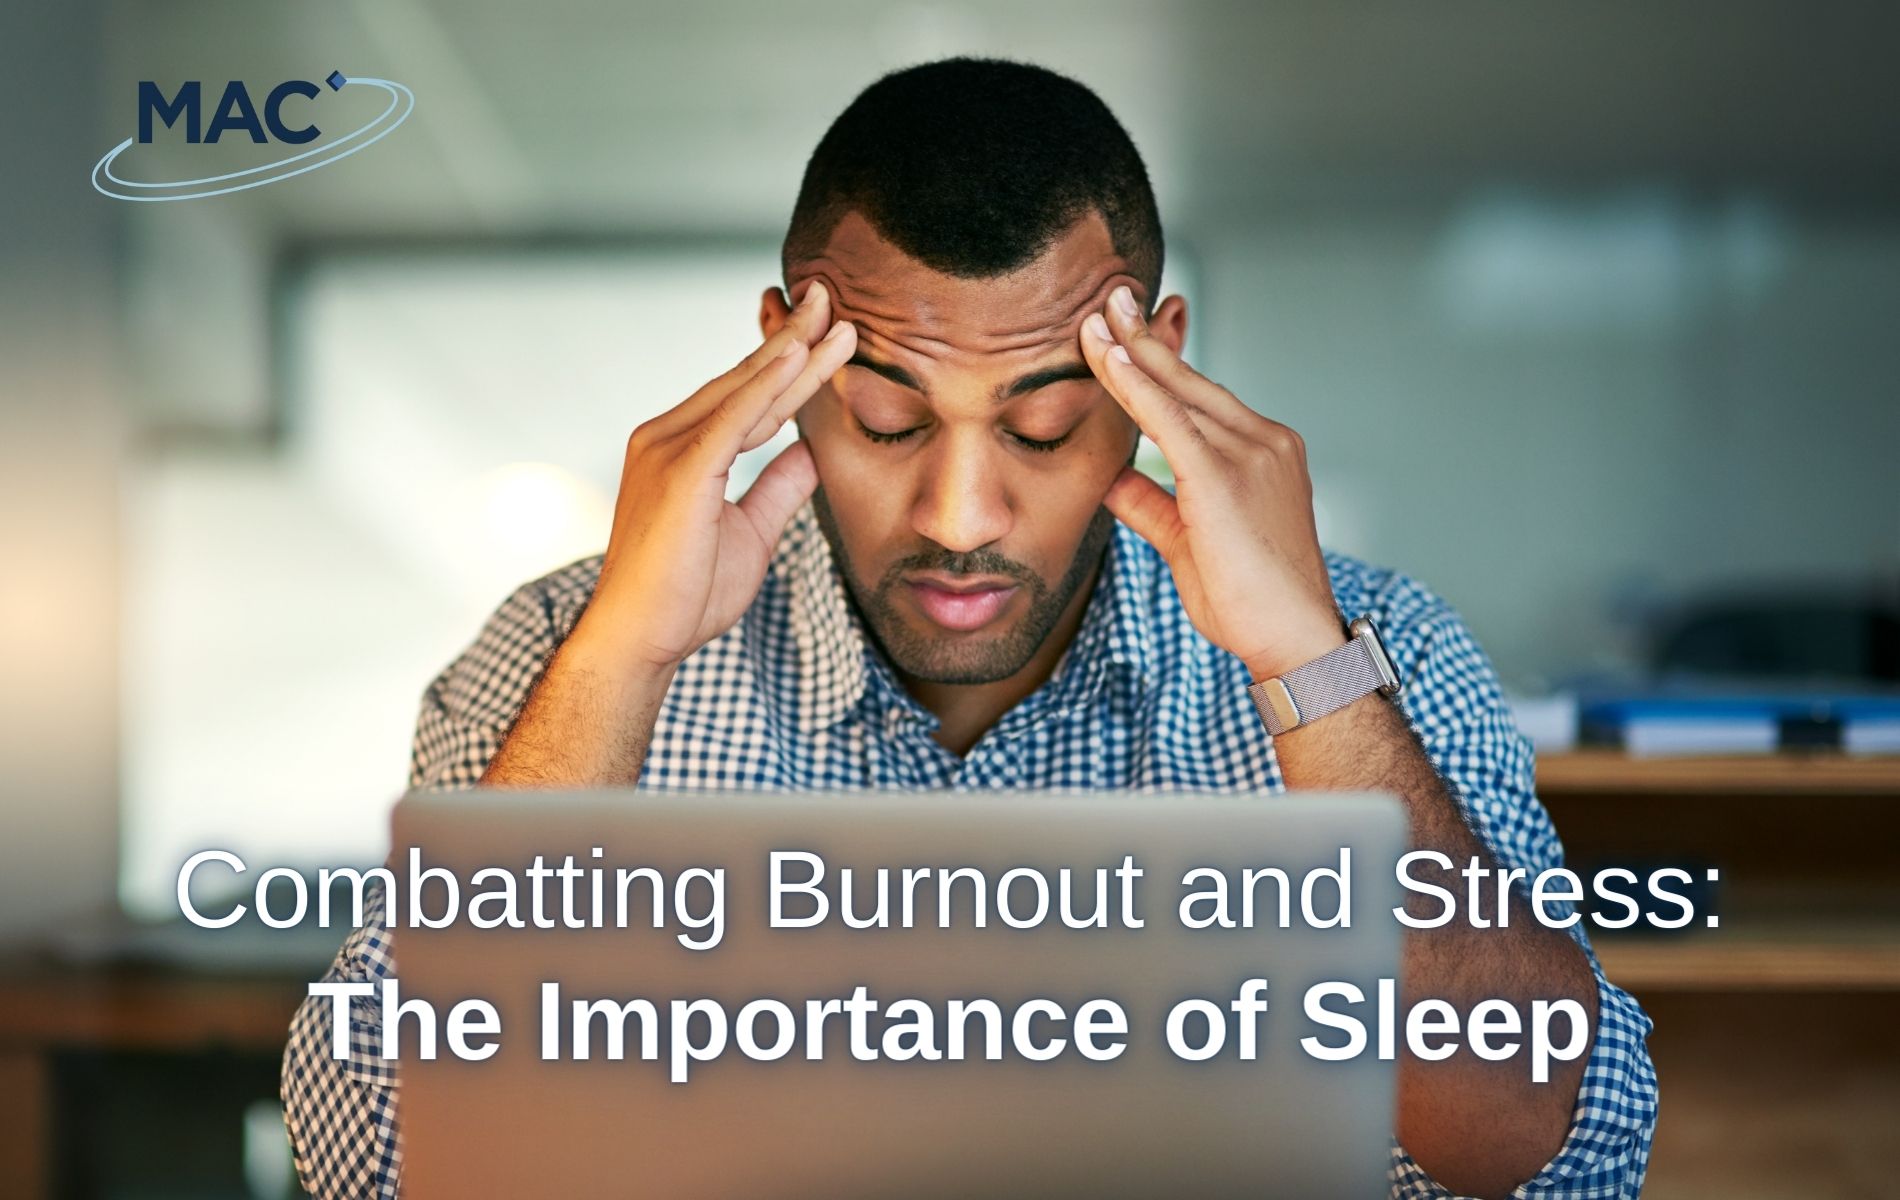 Combatting Burnout and Stress: The Importance of Sleep